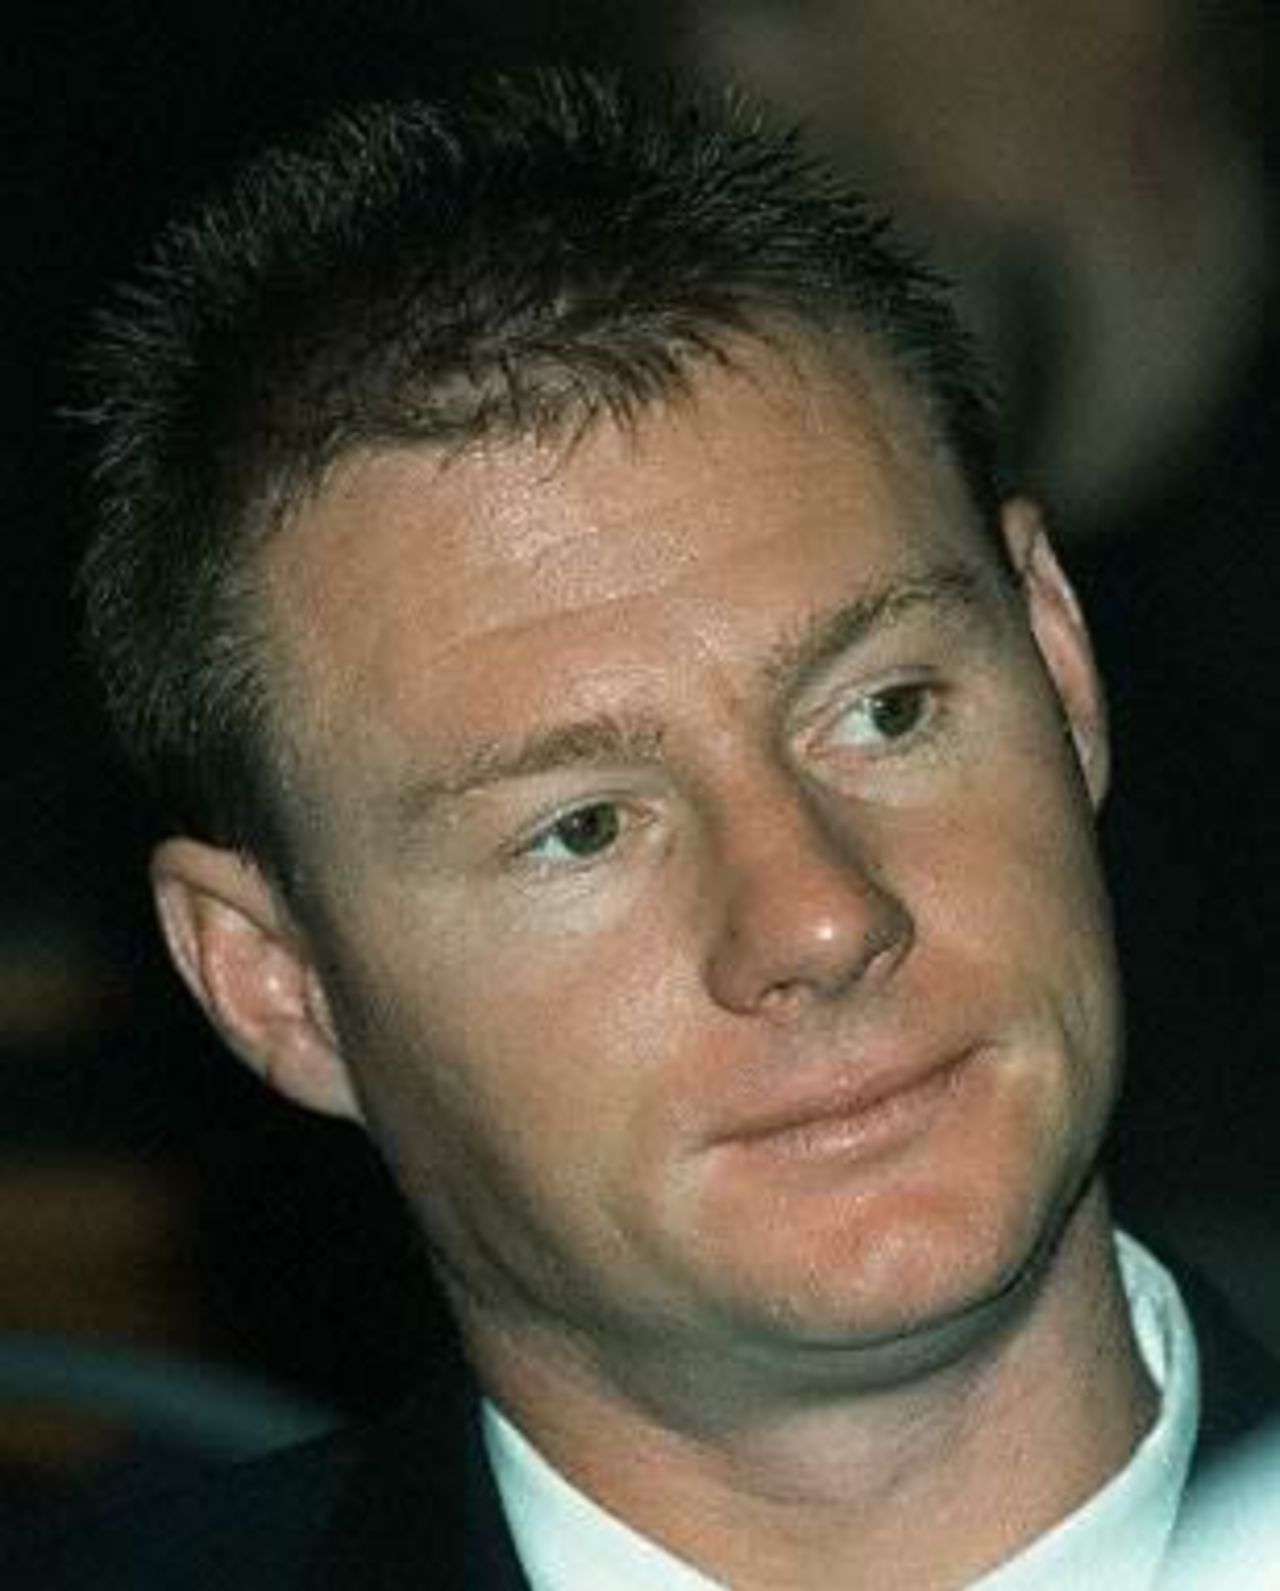 Cricketer Lance Klusener waits to testify before the King Commission of Inquiry into cricket match-fixing allegations being held in Cape Town 12 June 2000.